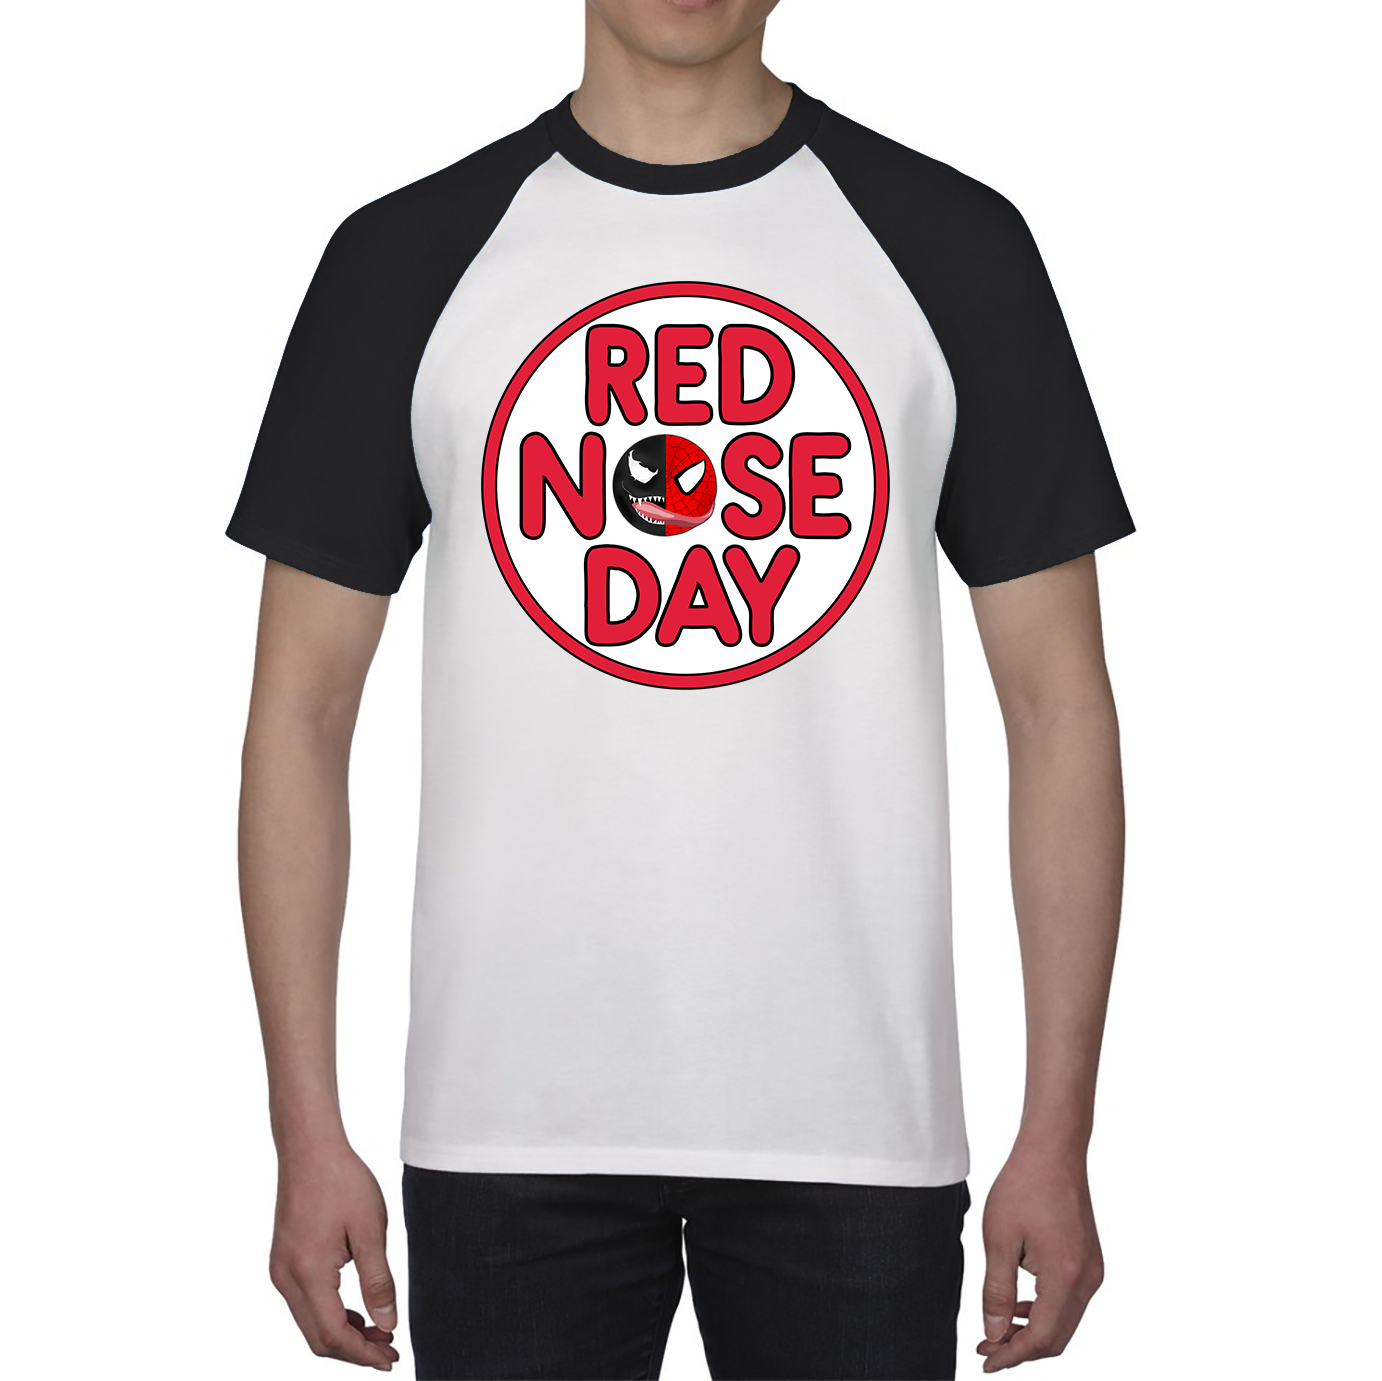 Marvel Venom Spiderman Red Nose Day Baseball T Shirt. 50% Goes To Charity